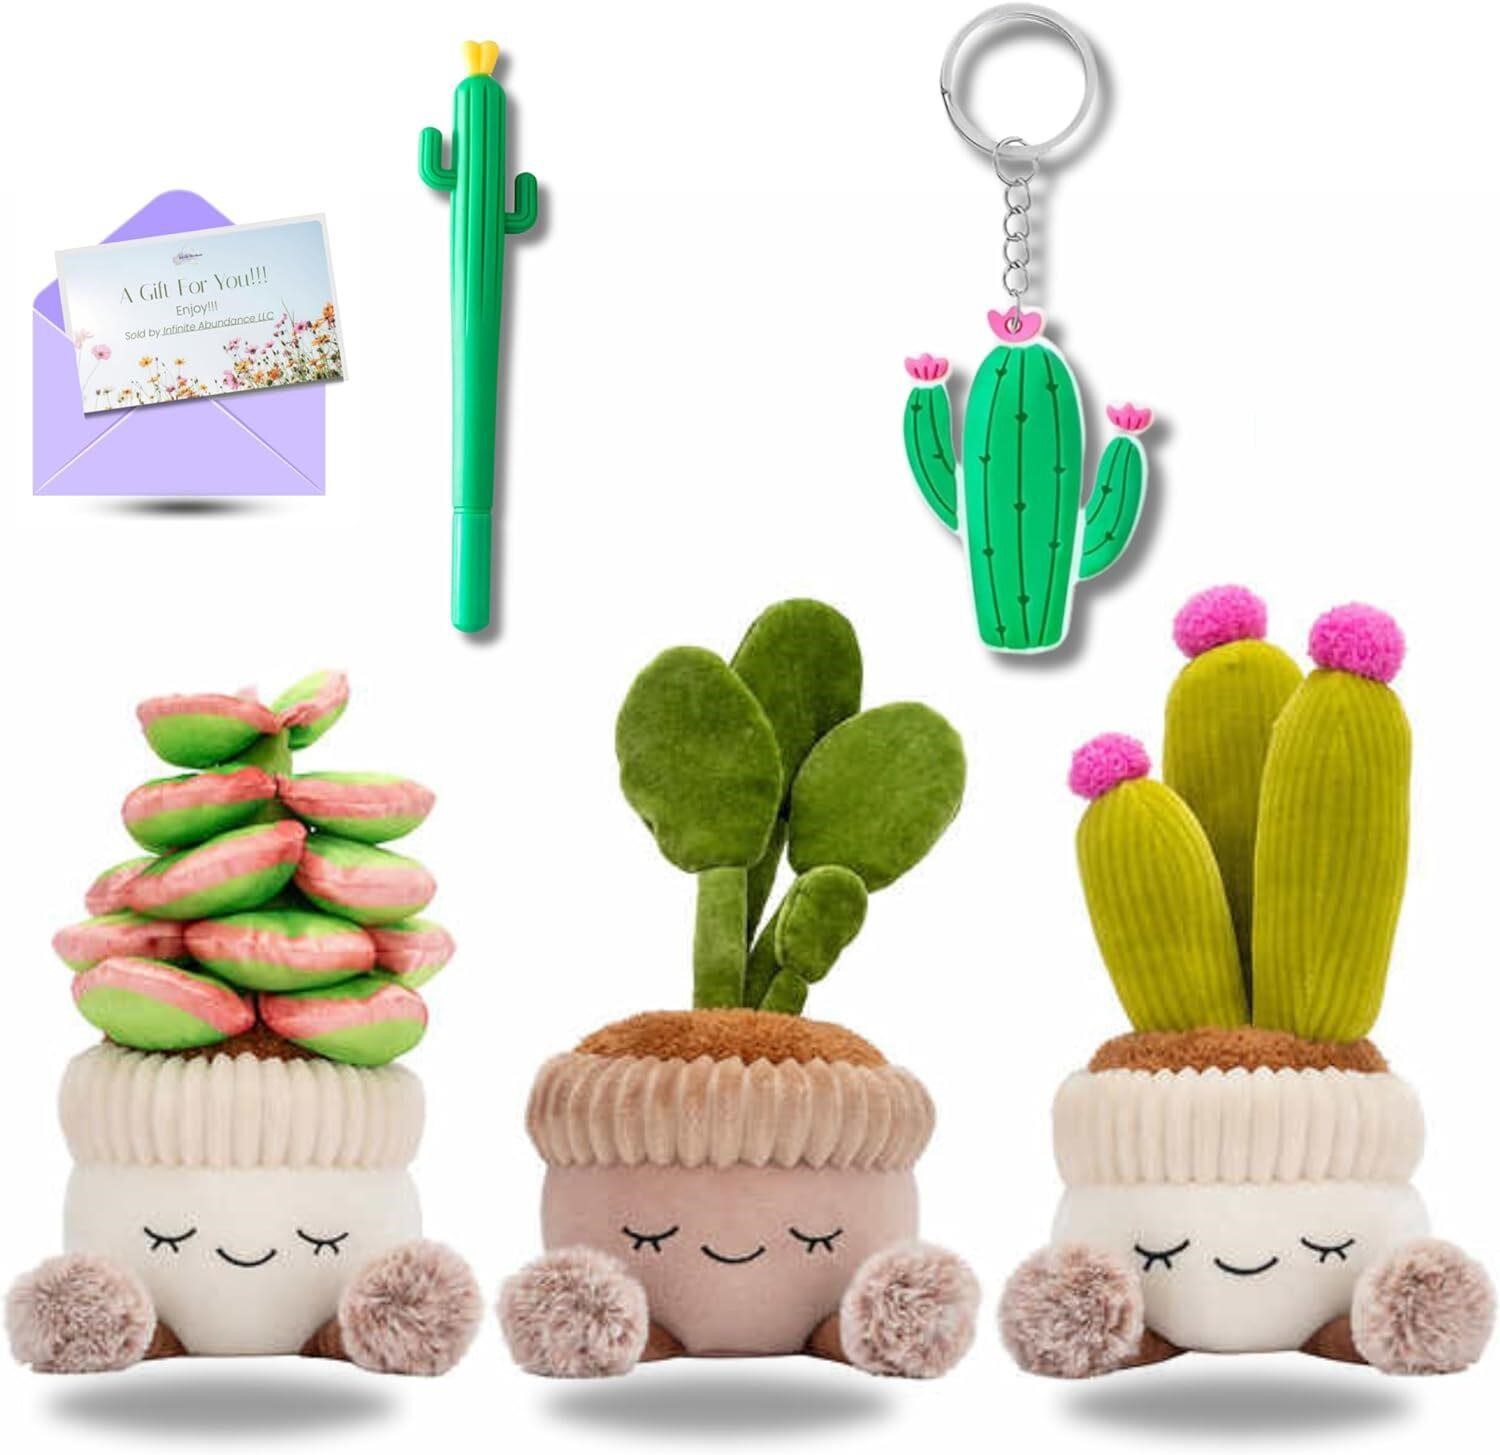 Potted Plush 3PK Greenhouse Cactus by Russ